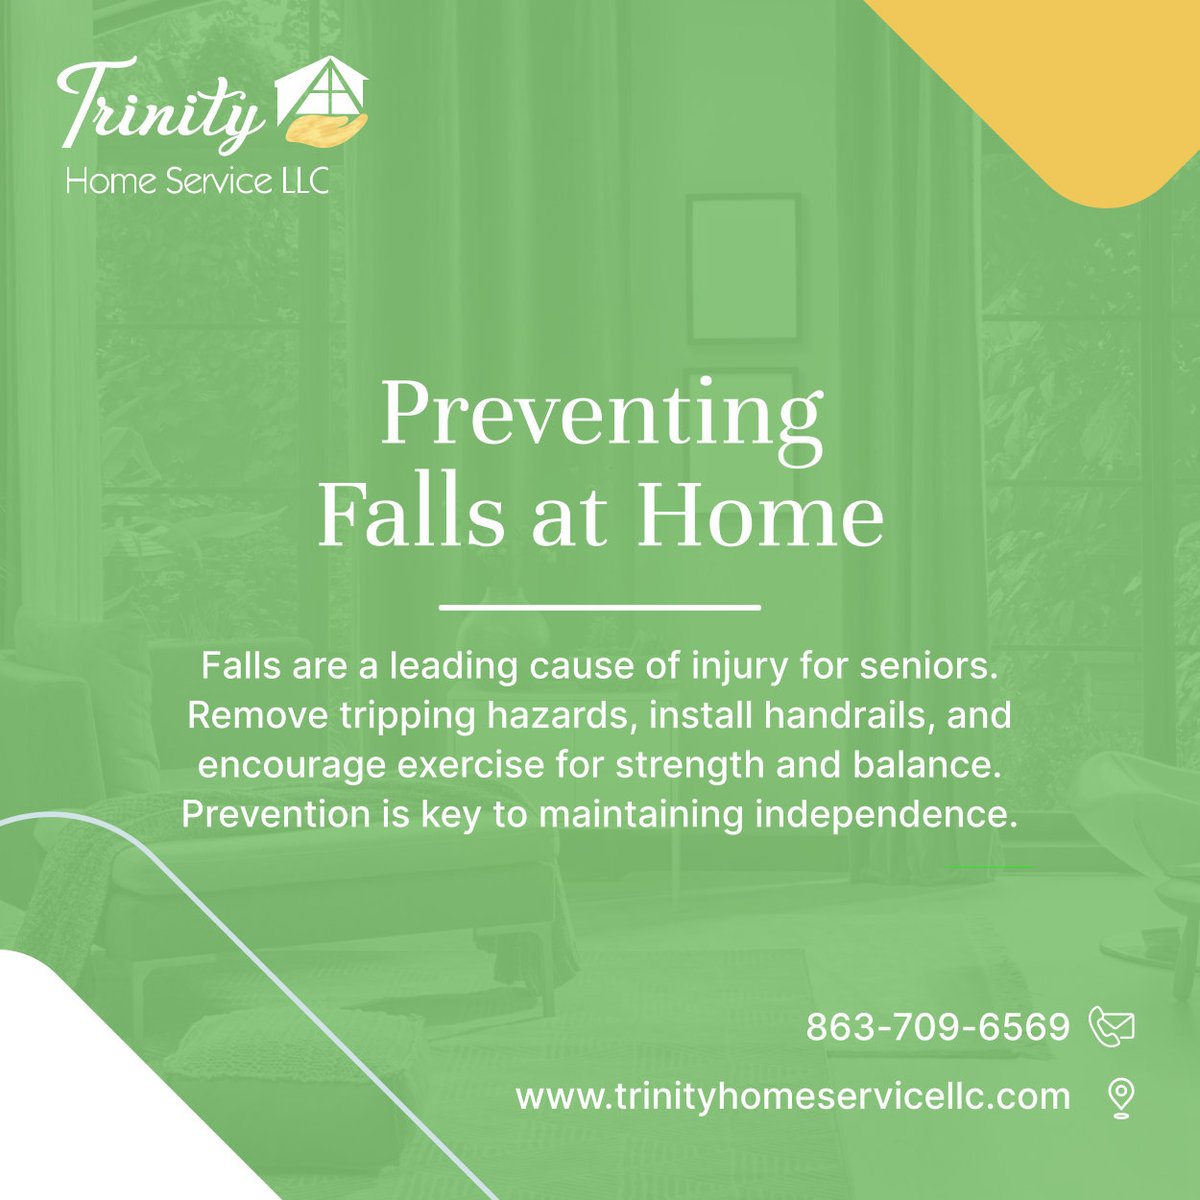 Don't let falls jeopardize your independence. Take proactive steps to create a safe environment at home and reduce fall risks. 

#LakelandFL #HomeCare #FallPrevention